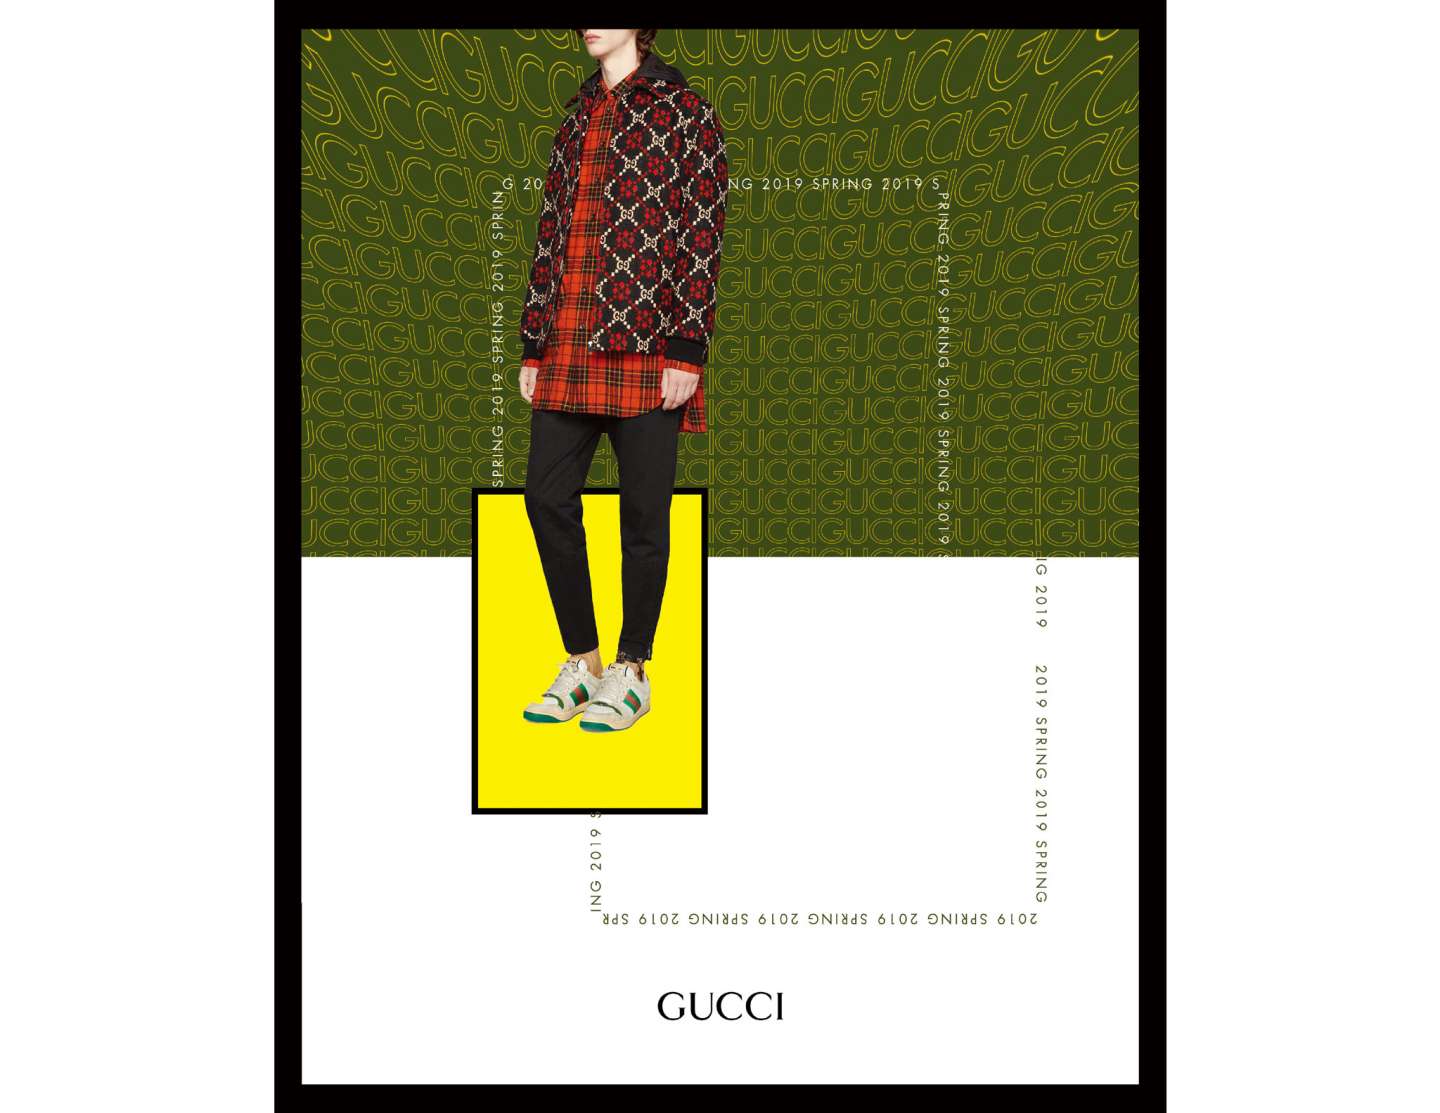 Gucci Man’s Shoes AD